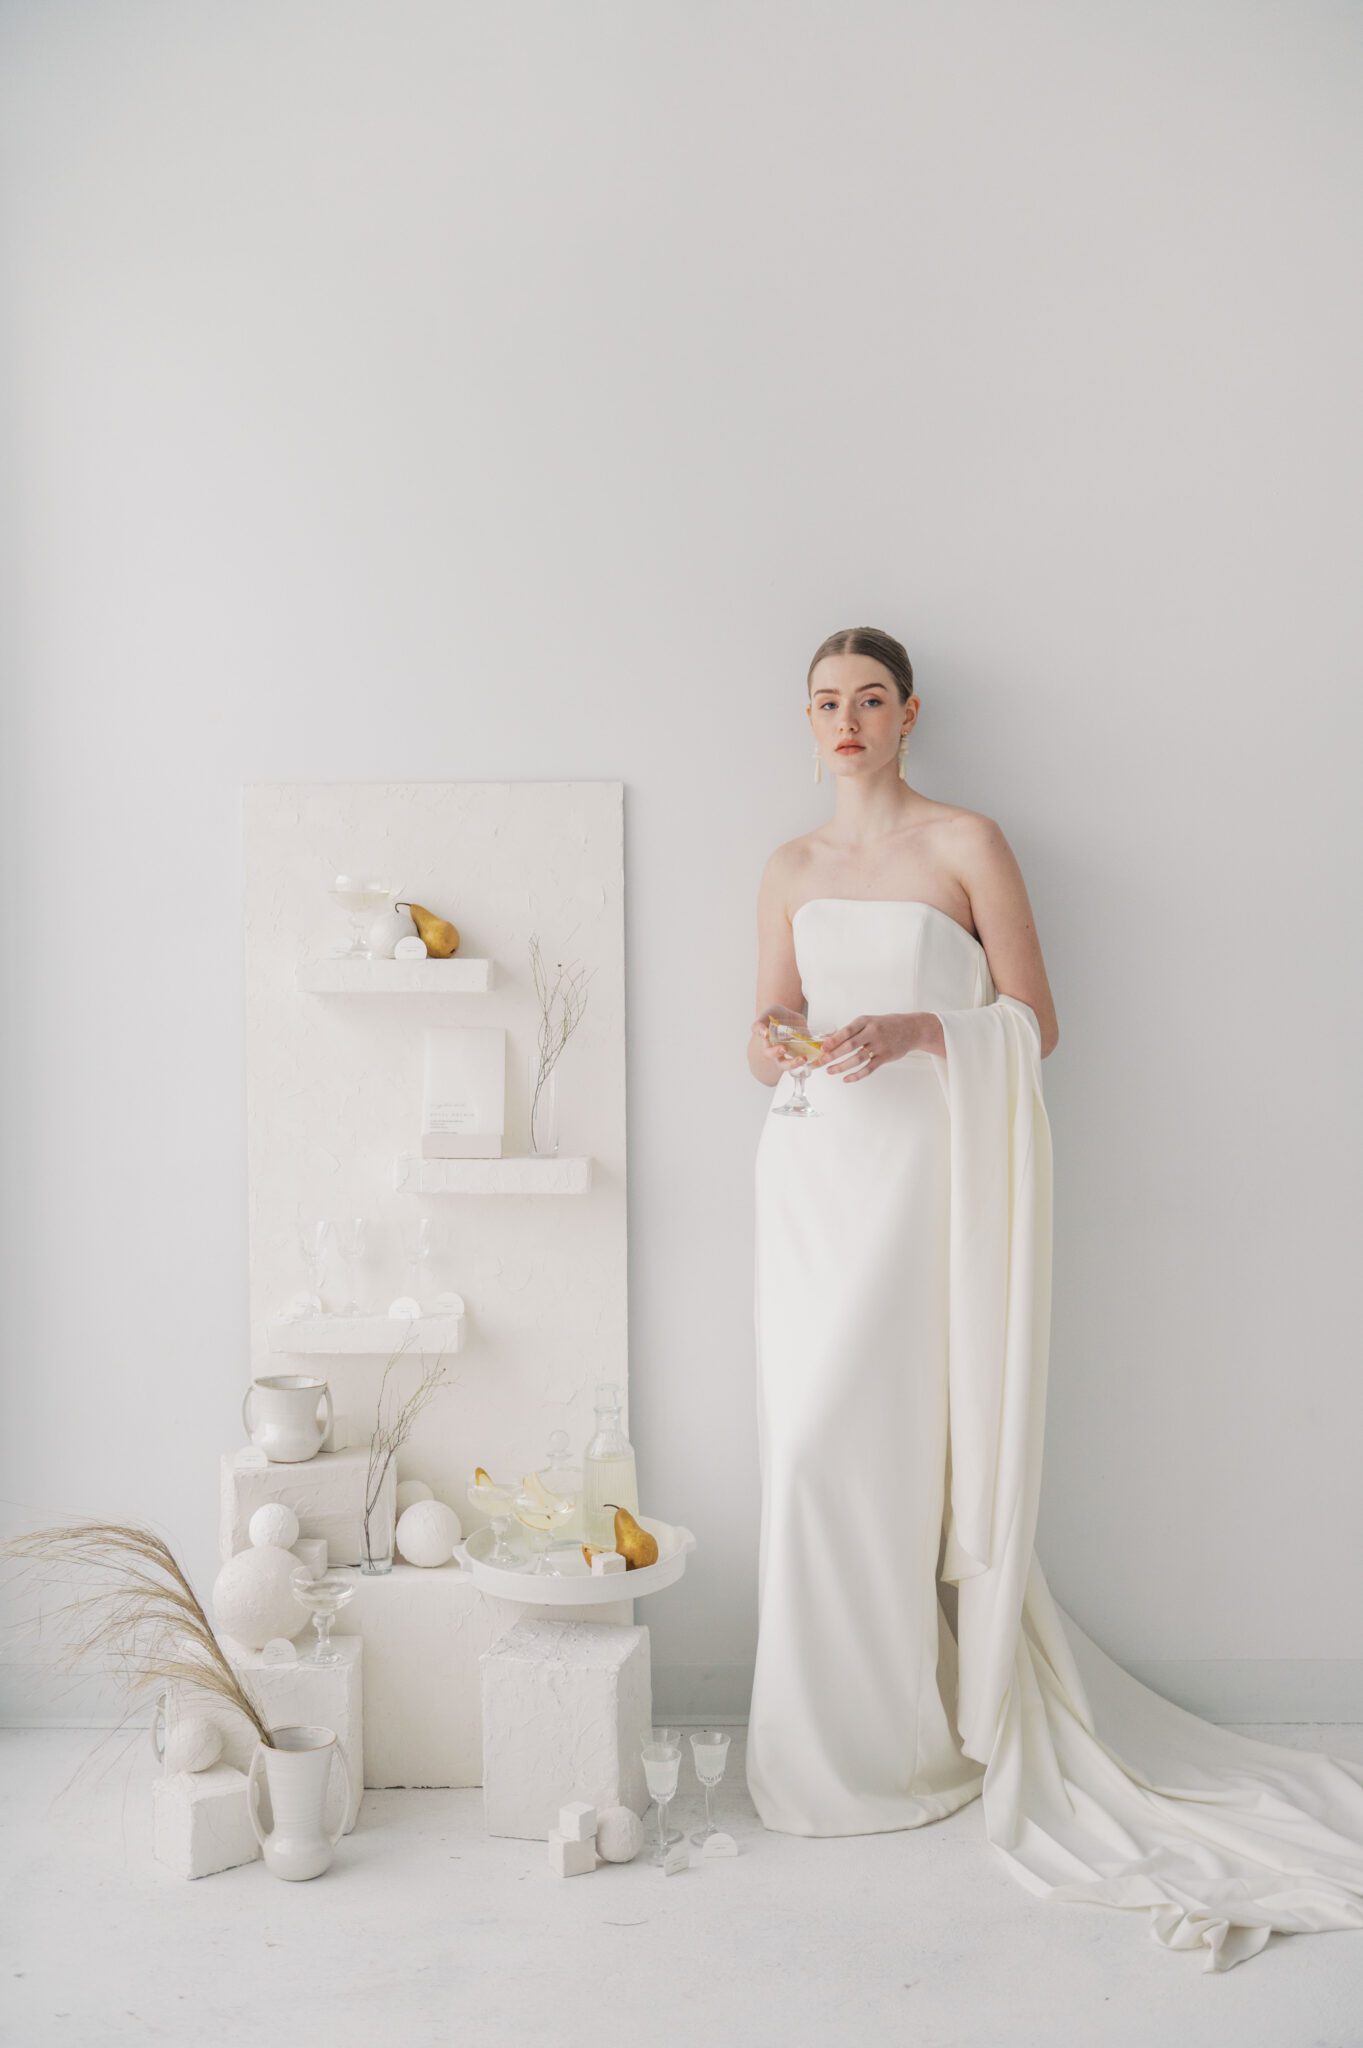 Grecian style wedding gown by Aesling: a fashionable choice for modern brides, plaster shelf for place cards set up in Studio Boheme